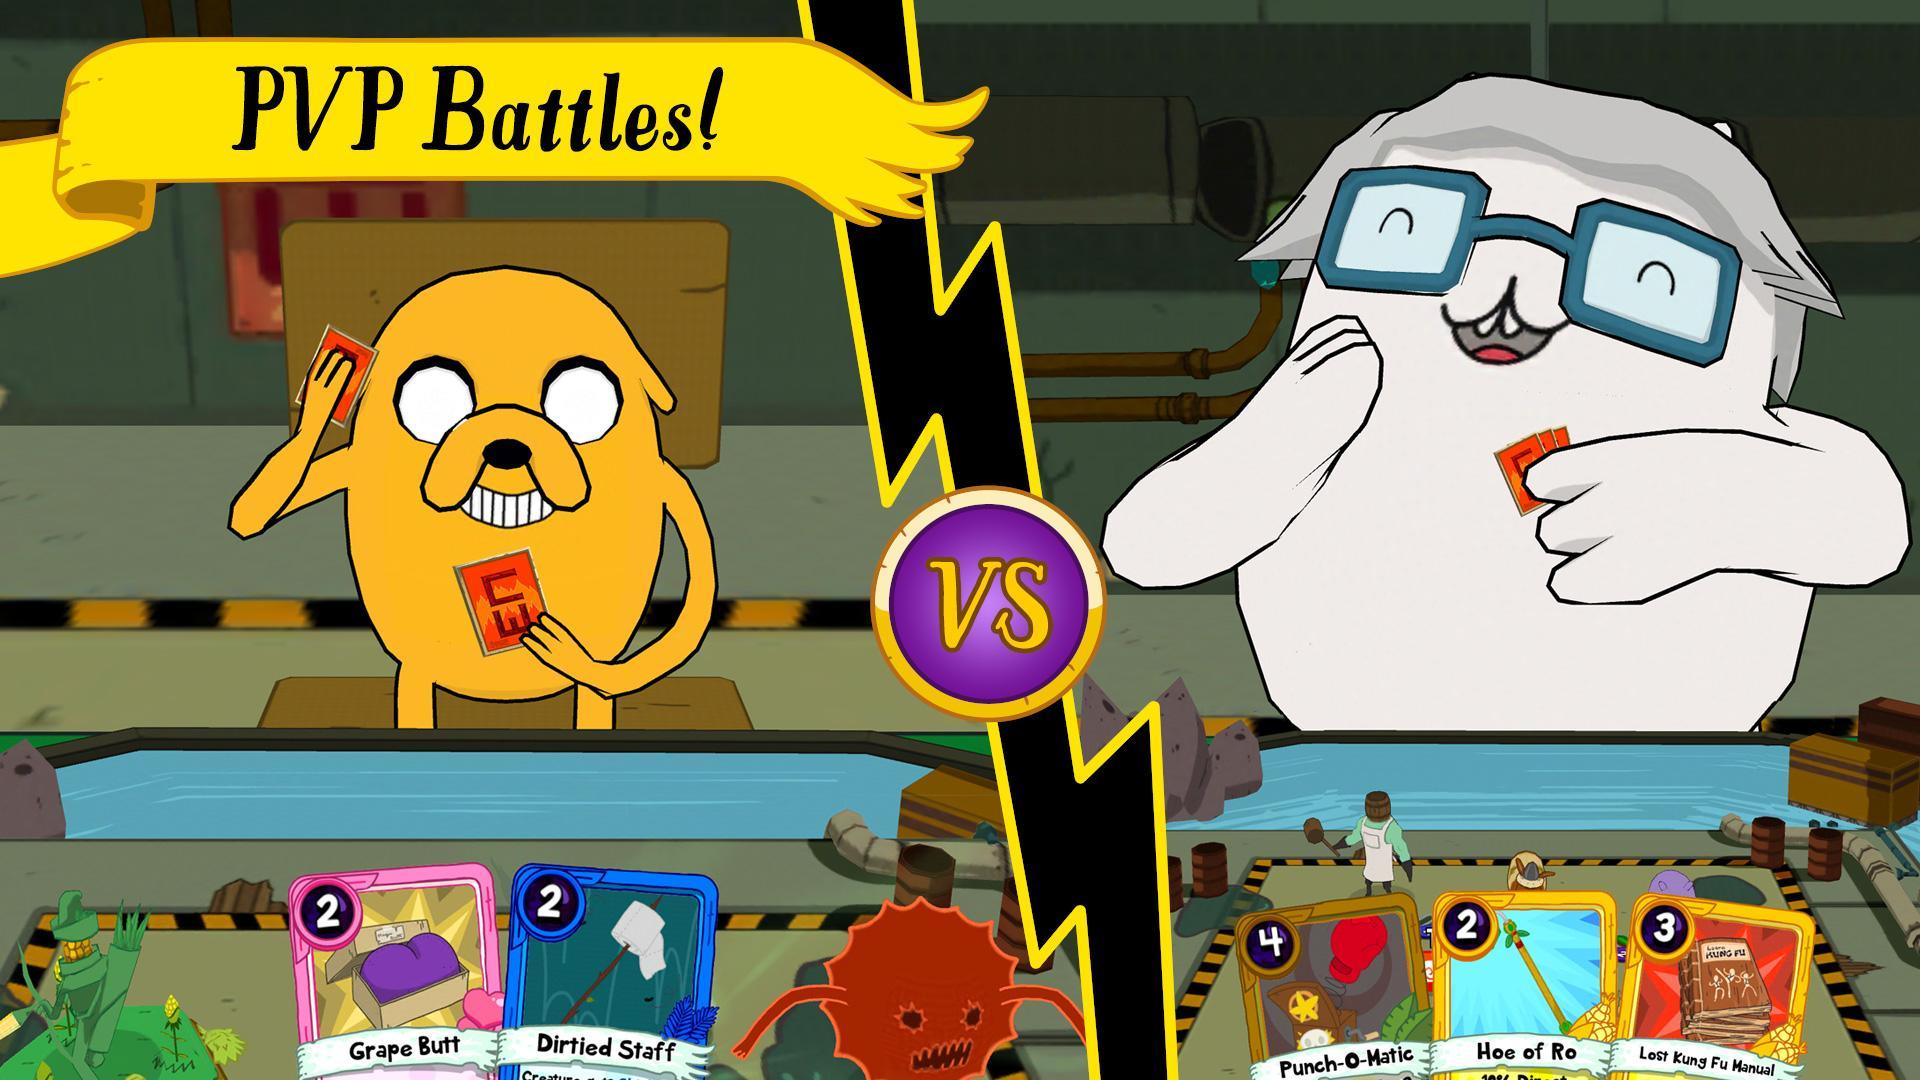 adventure time card wars